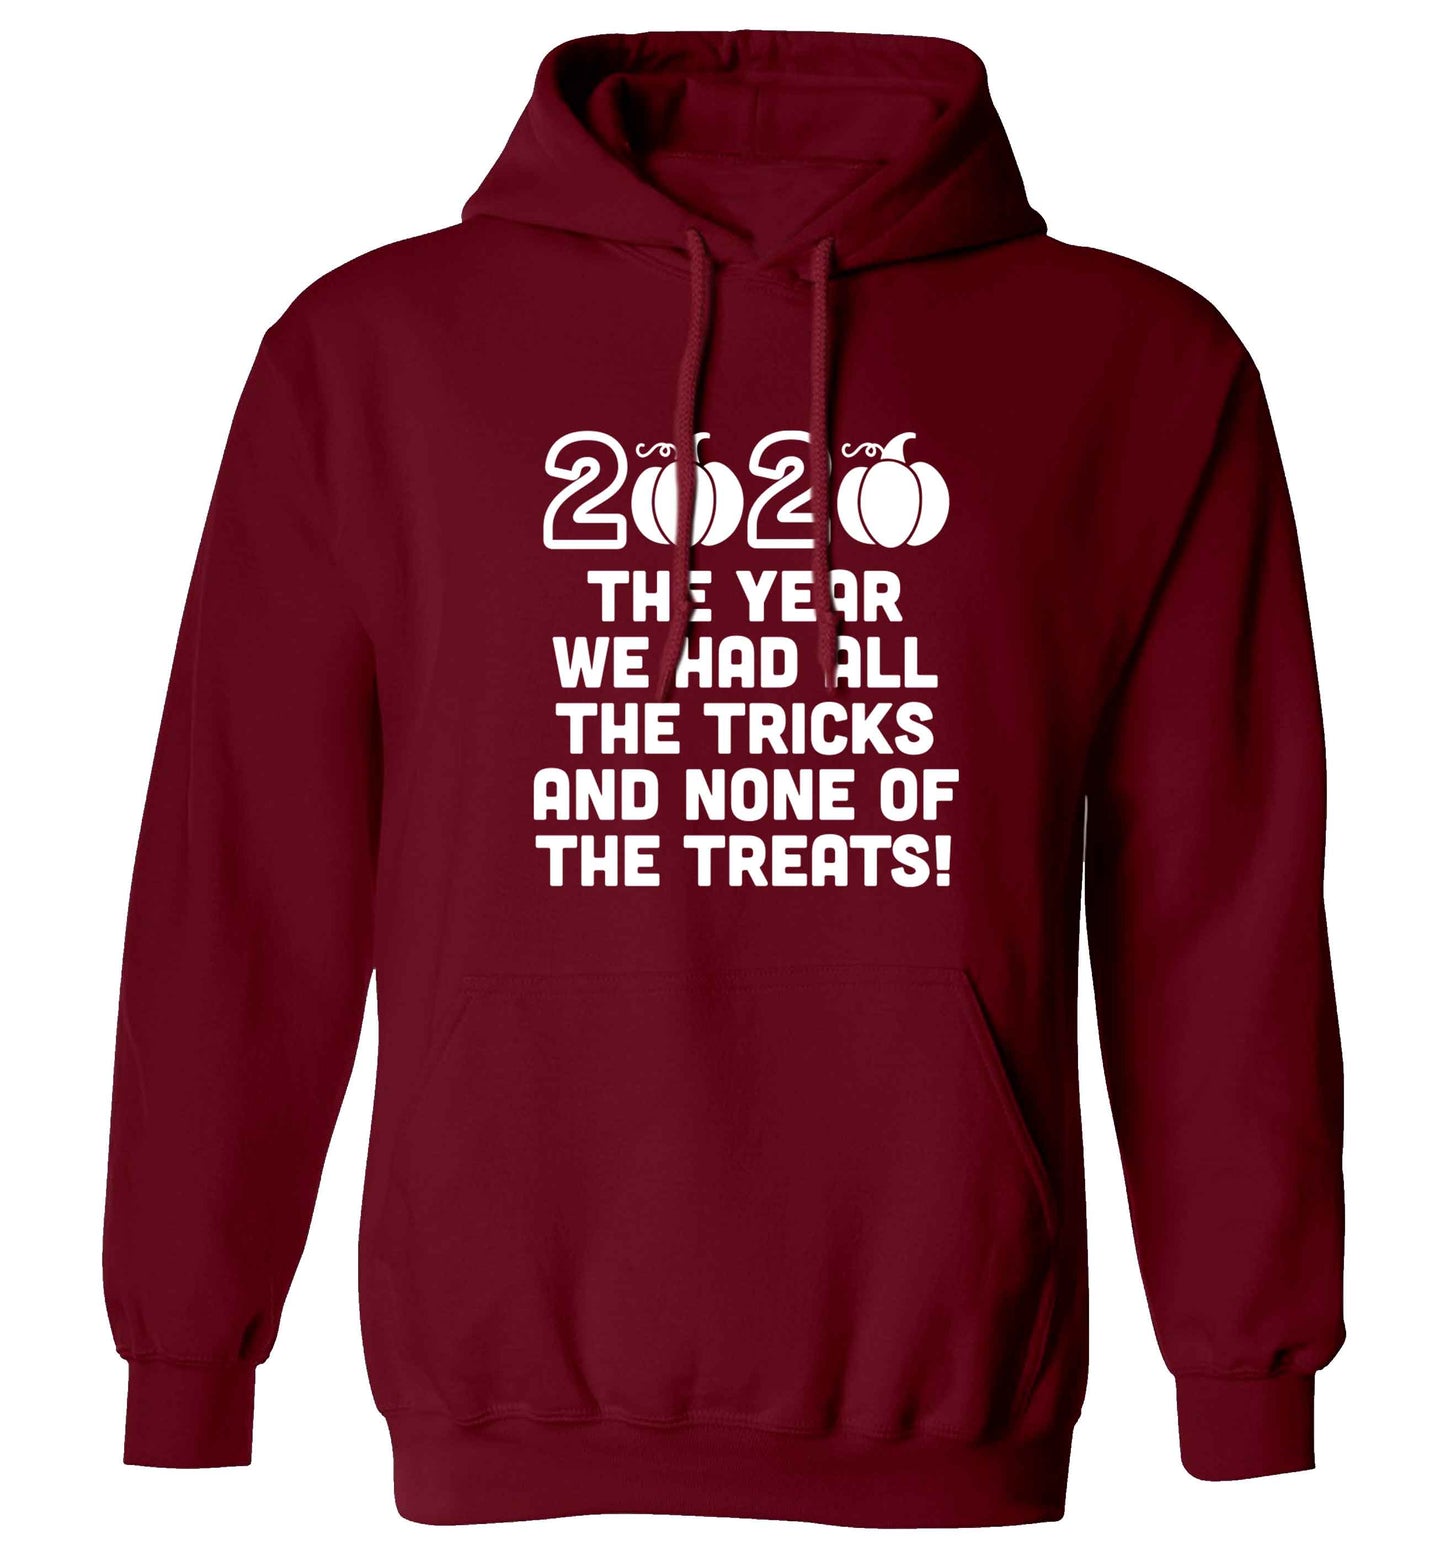 2020 The year we had all of the tricks and none of the treats adults unisex maroon hoodie 2XL